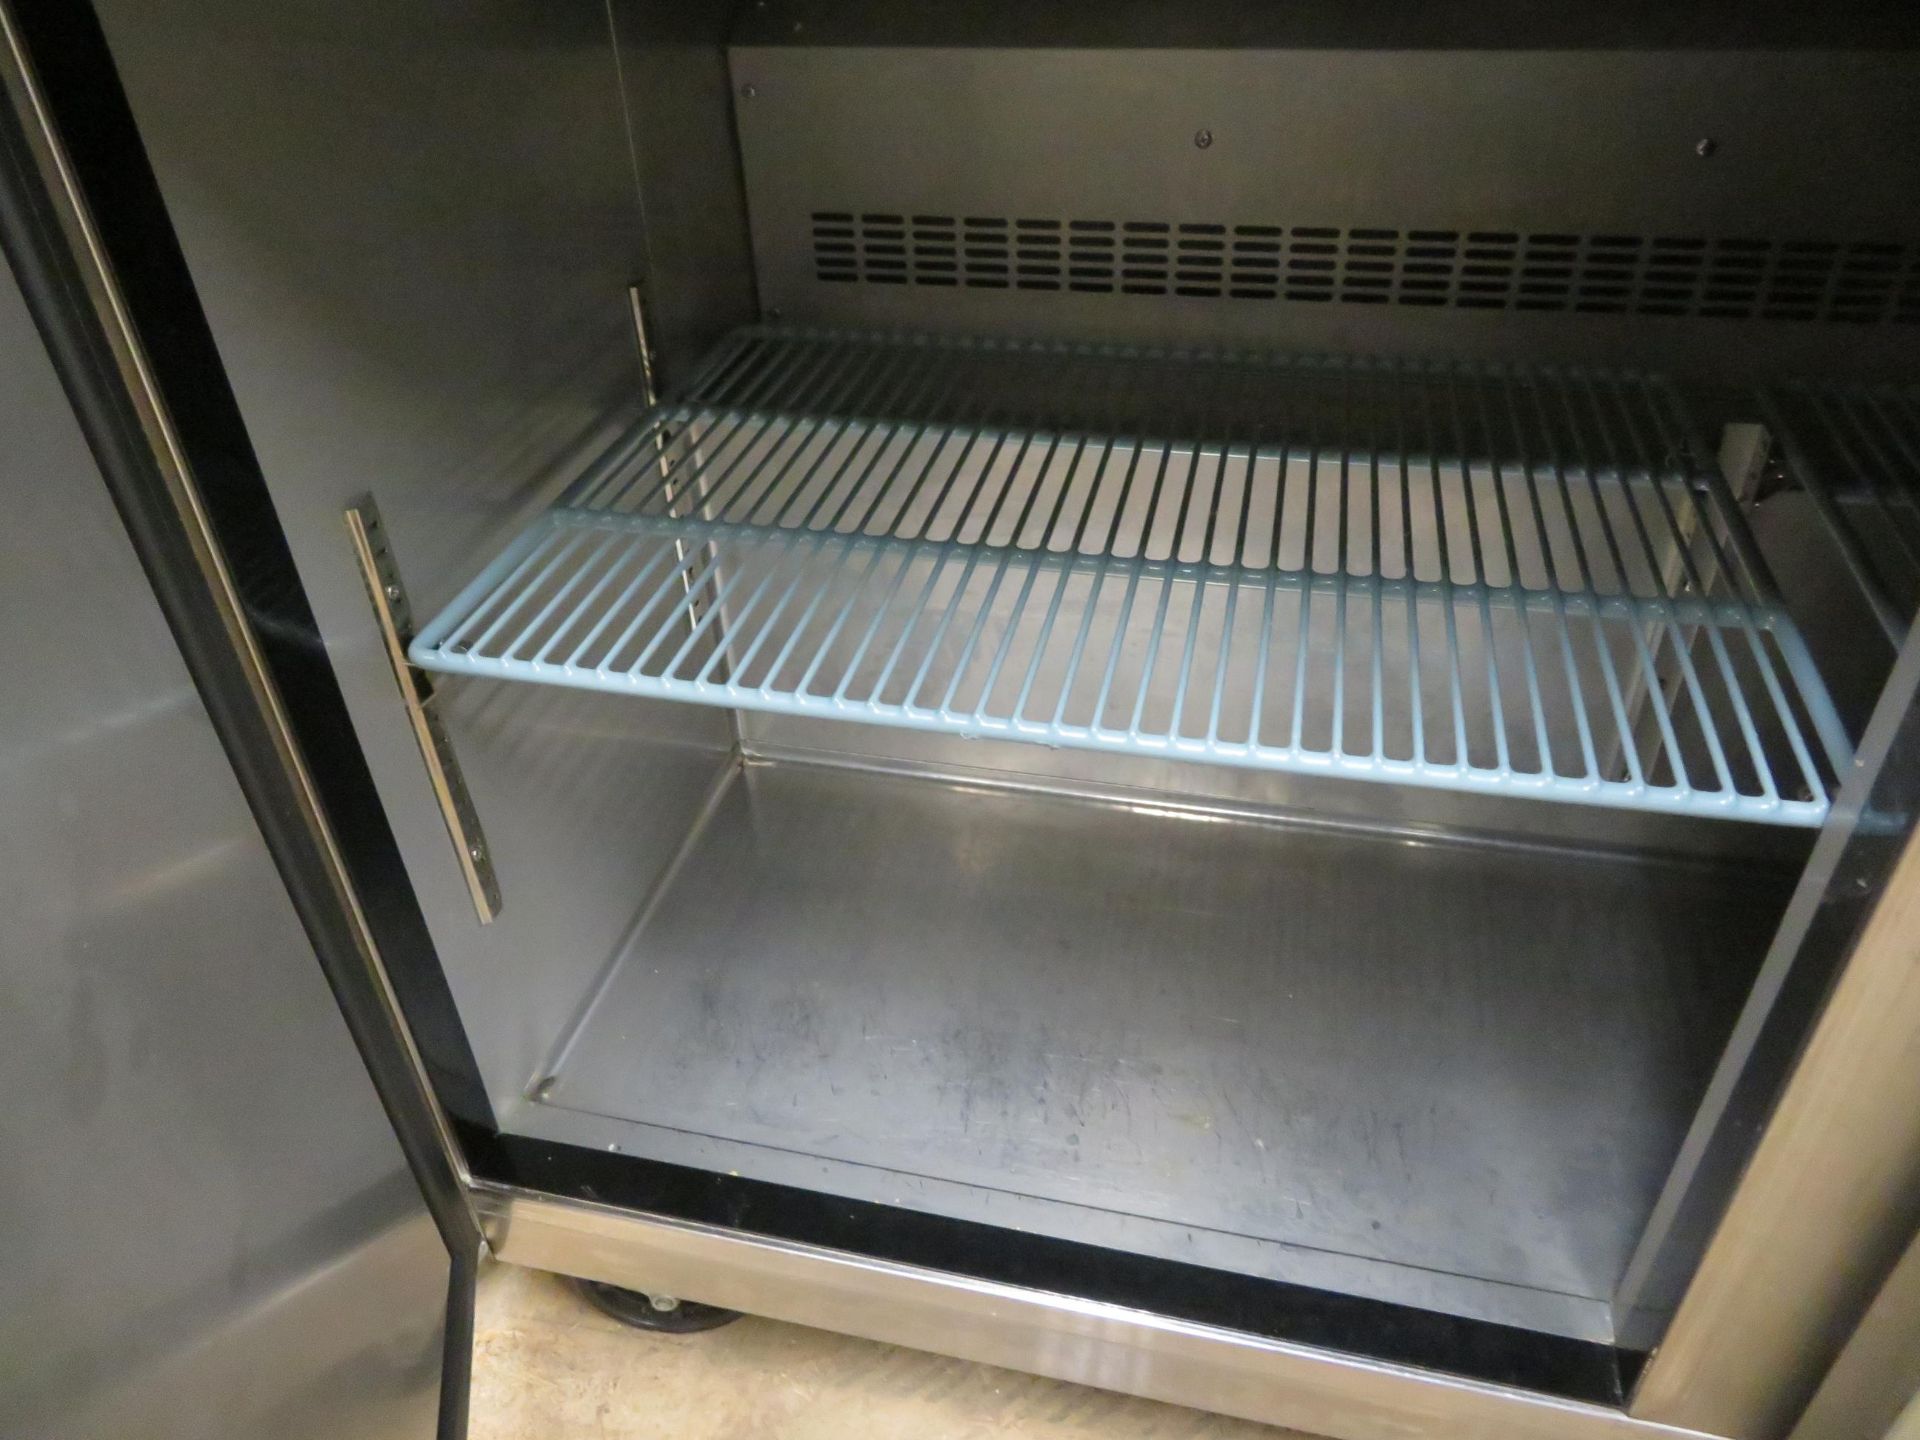 NEW AIR 3 door refrigerated preparation table, Mod # MPT-072-SA, approx. 72"w x 32"d x 36"h - Image 3 of 4